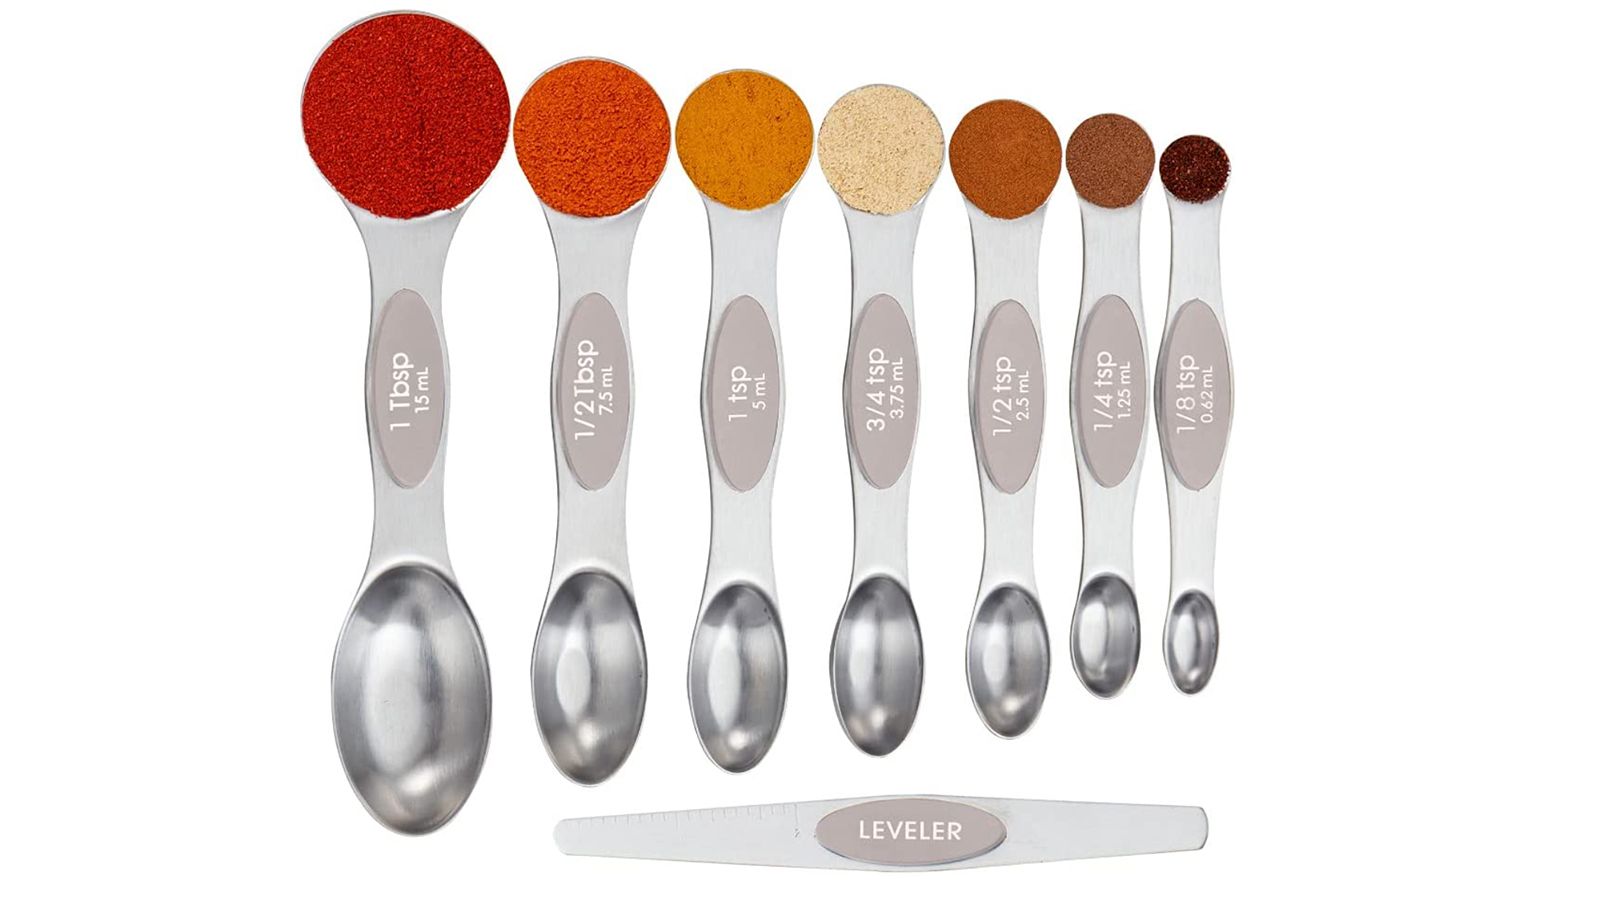  Sur La Table Rectangular Measuring Spoon Set, Stainless Steel,  Fits in Spice Jars, Silver, Set of 6: Home & Kitchen